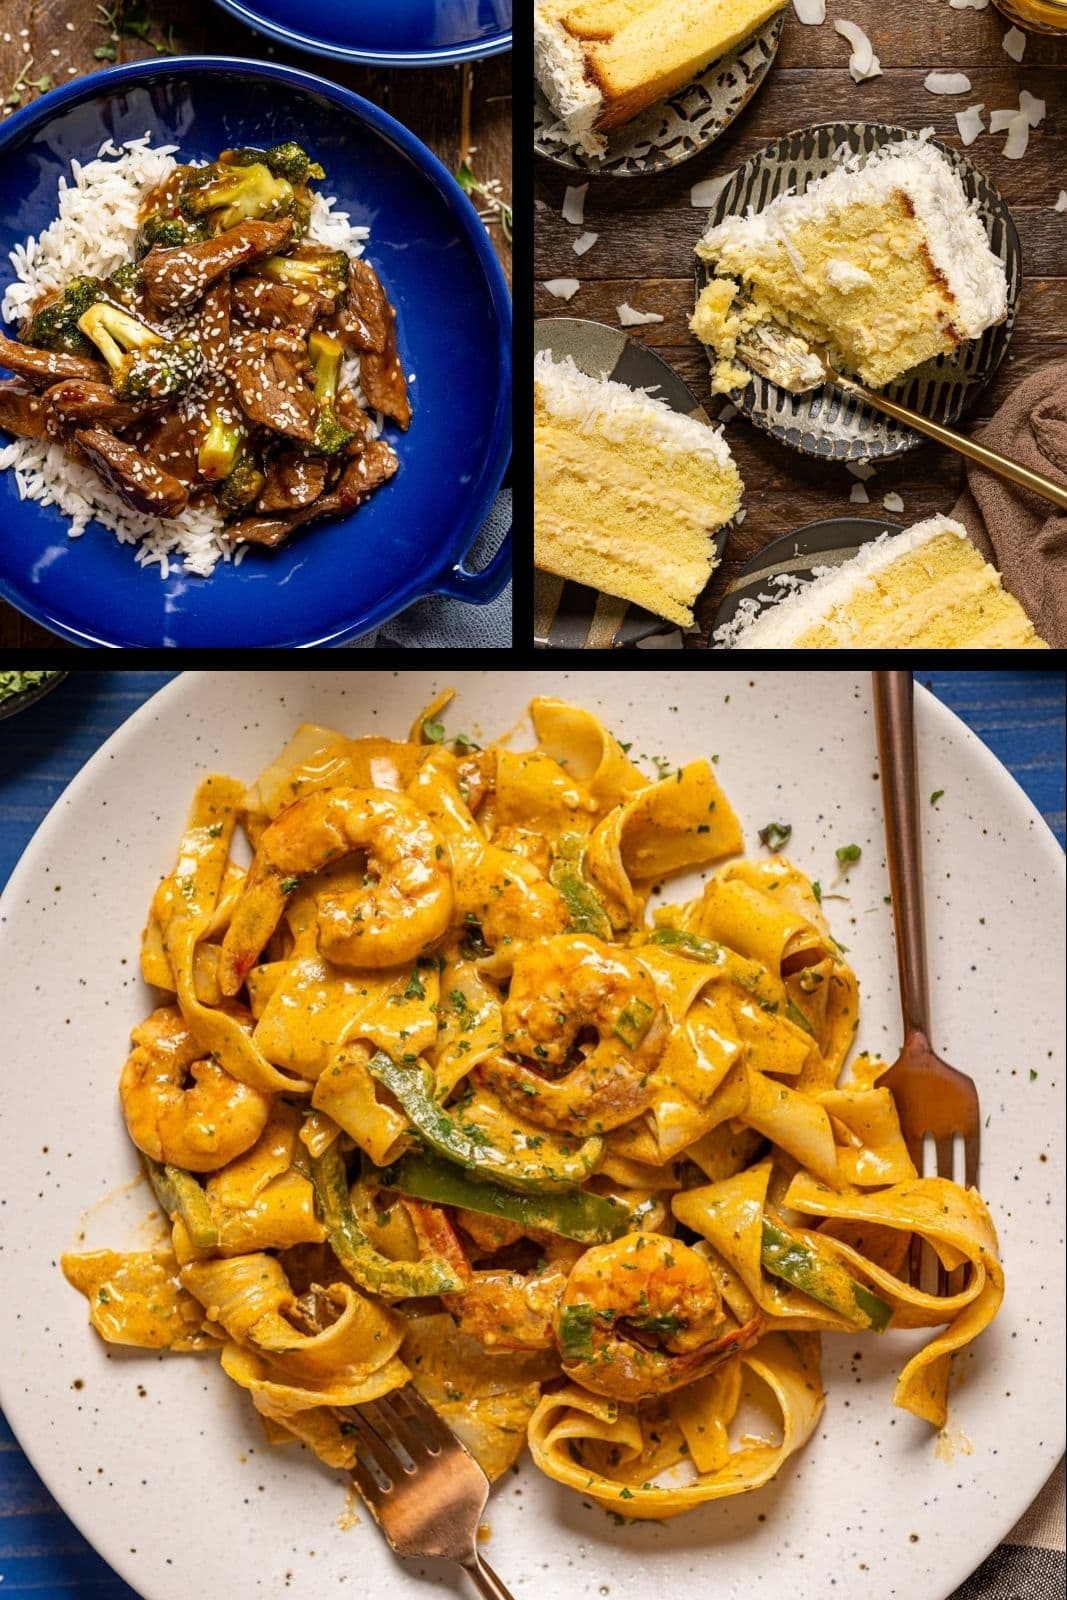 Collage of recipes in What To Eat This Week.